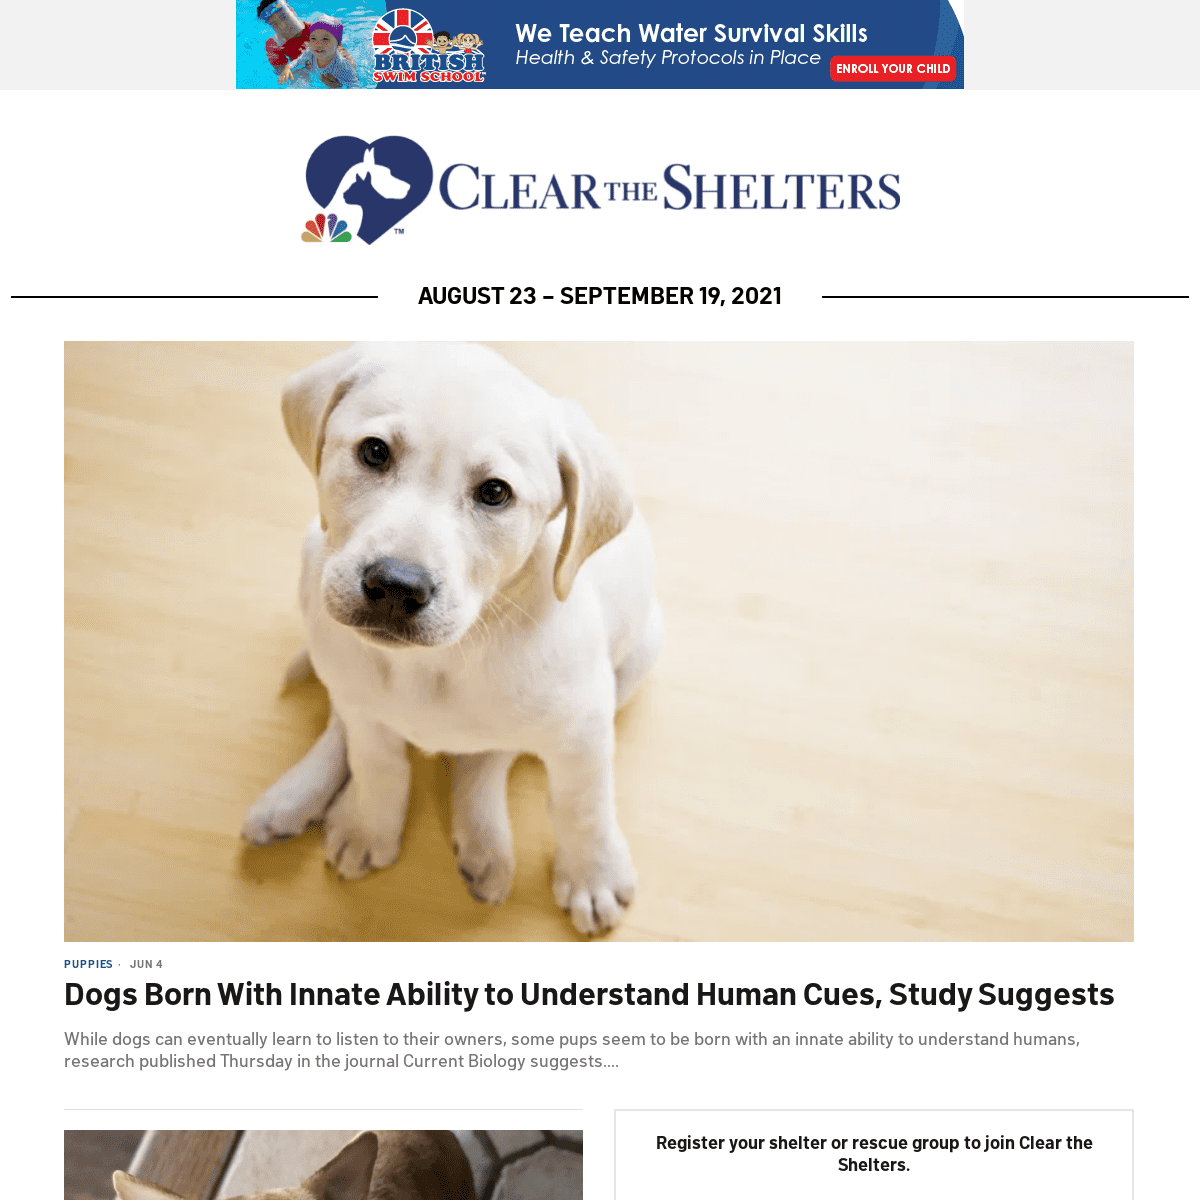 A complete backup of https://cleartheshelters.com